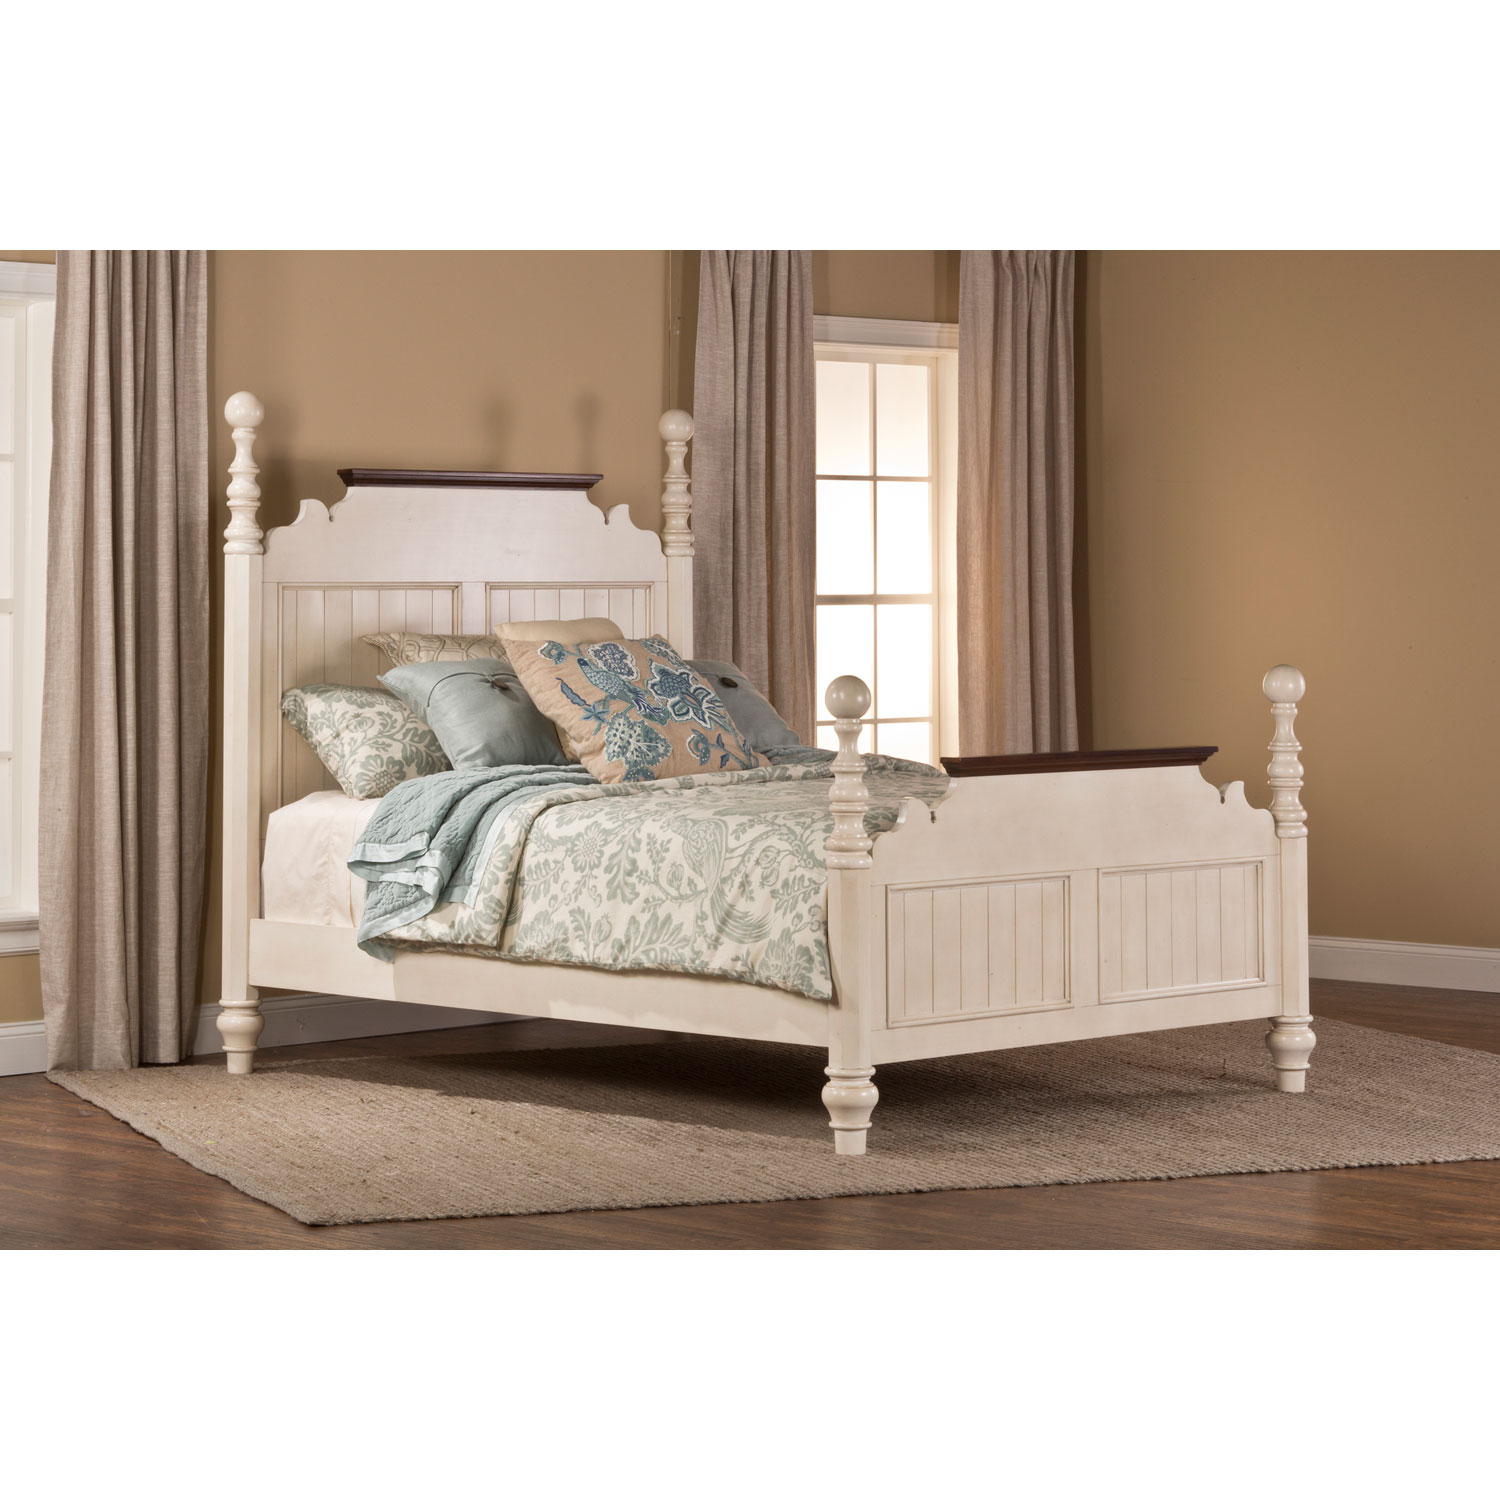 white bedroom furniture sets queen photo - 1